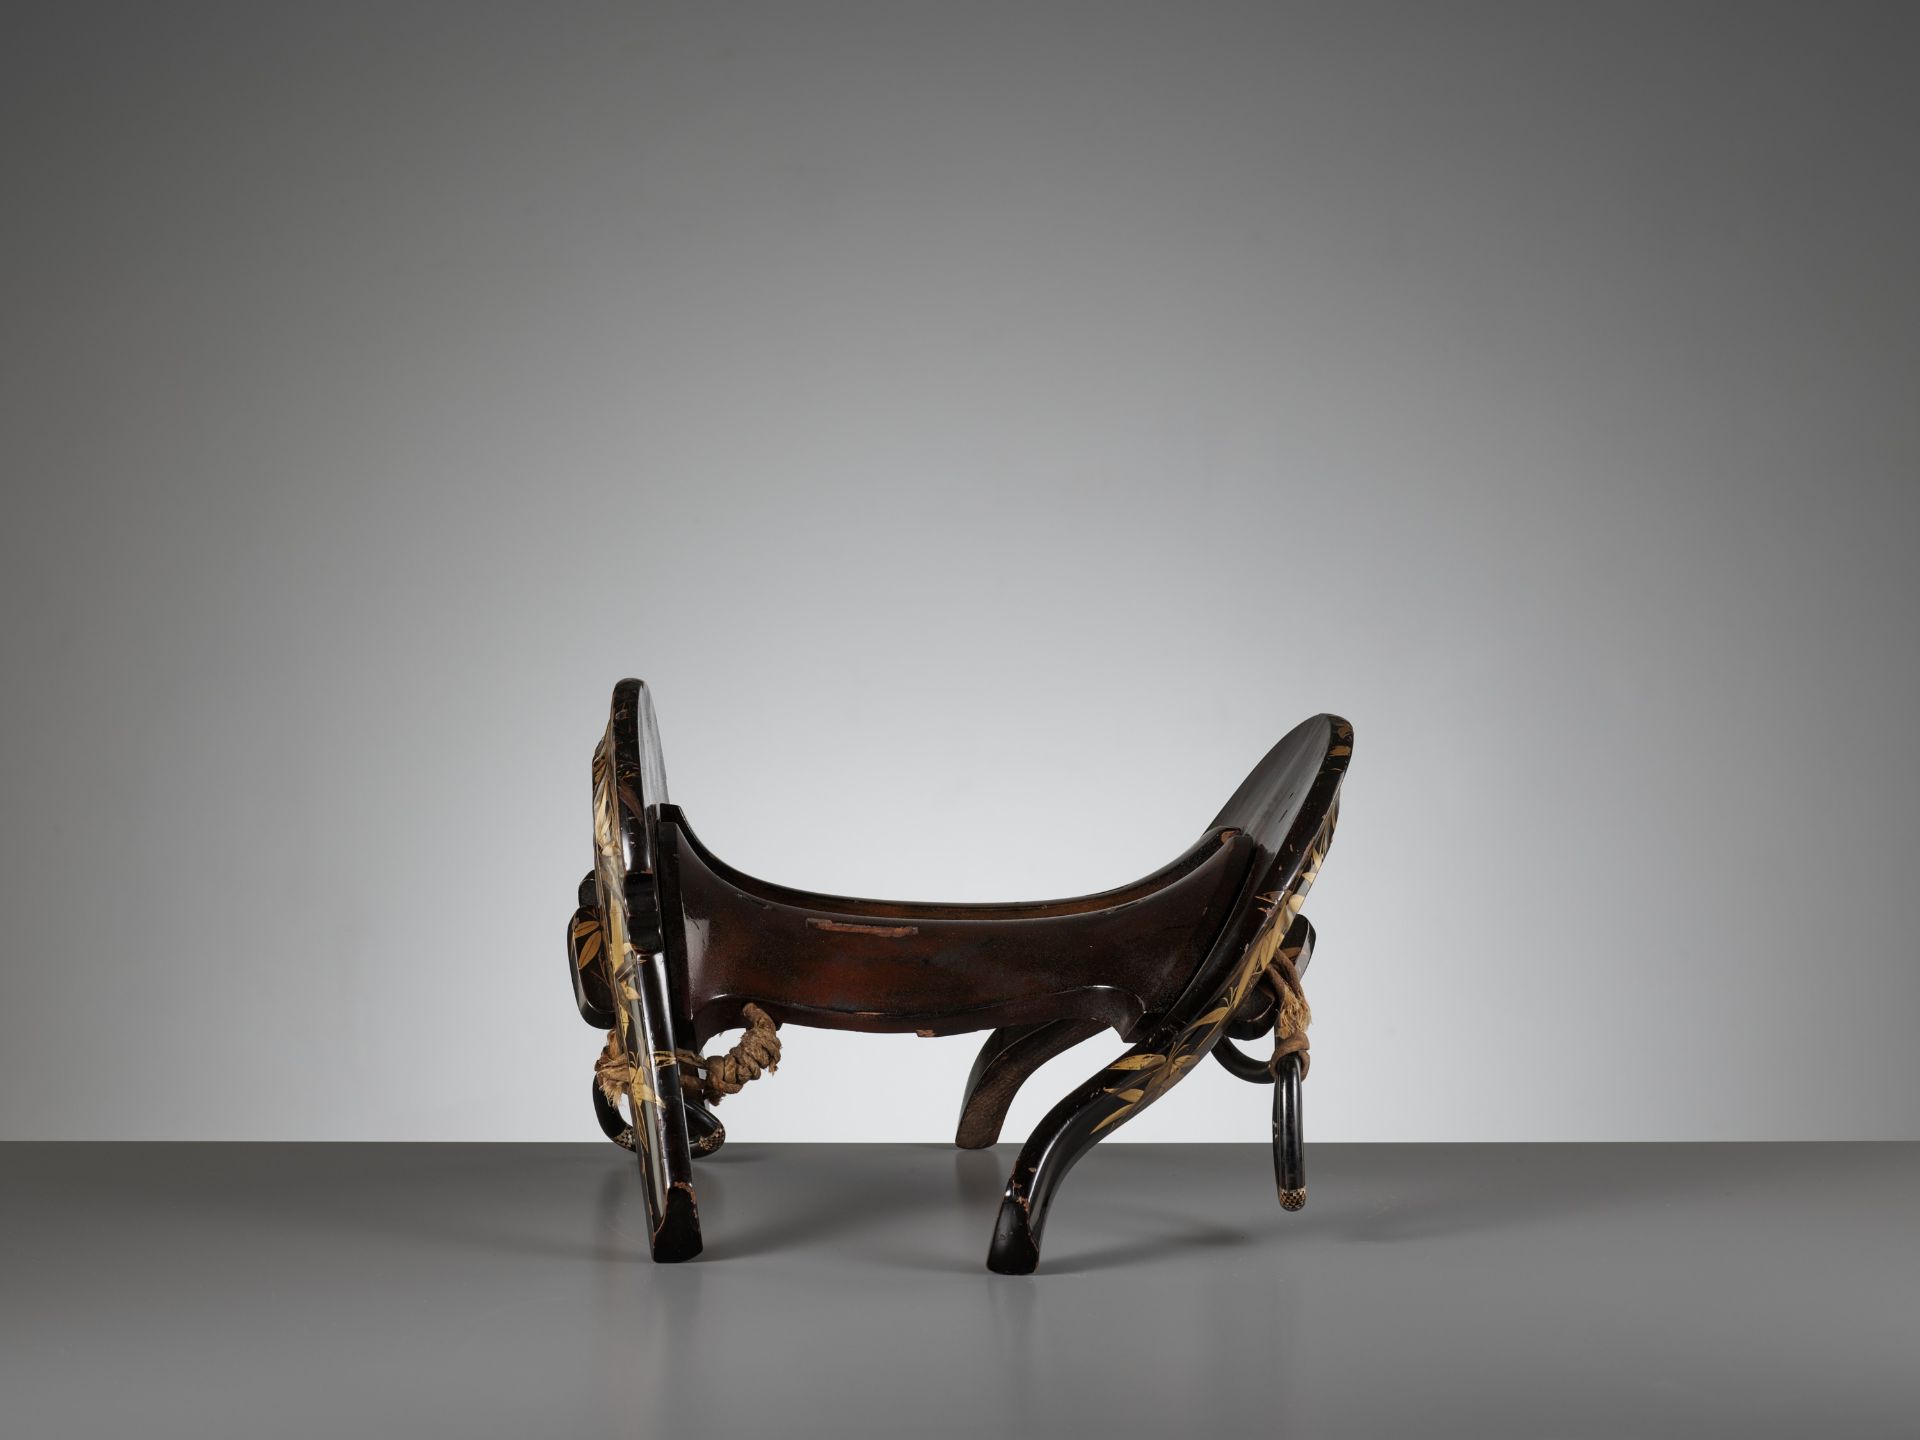 A LACQUERED WOOD KURA (SADDLE) WITH TIGERS IN BAMBOO - Image 9 of 14